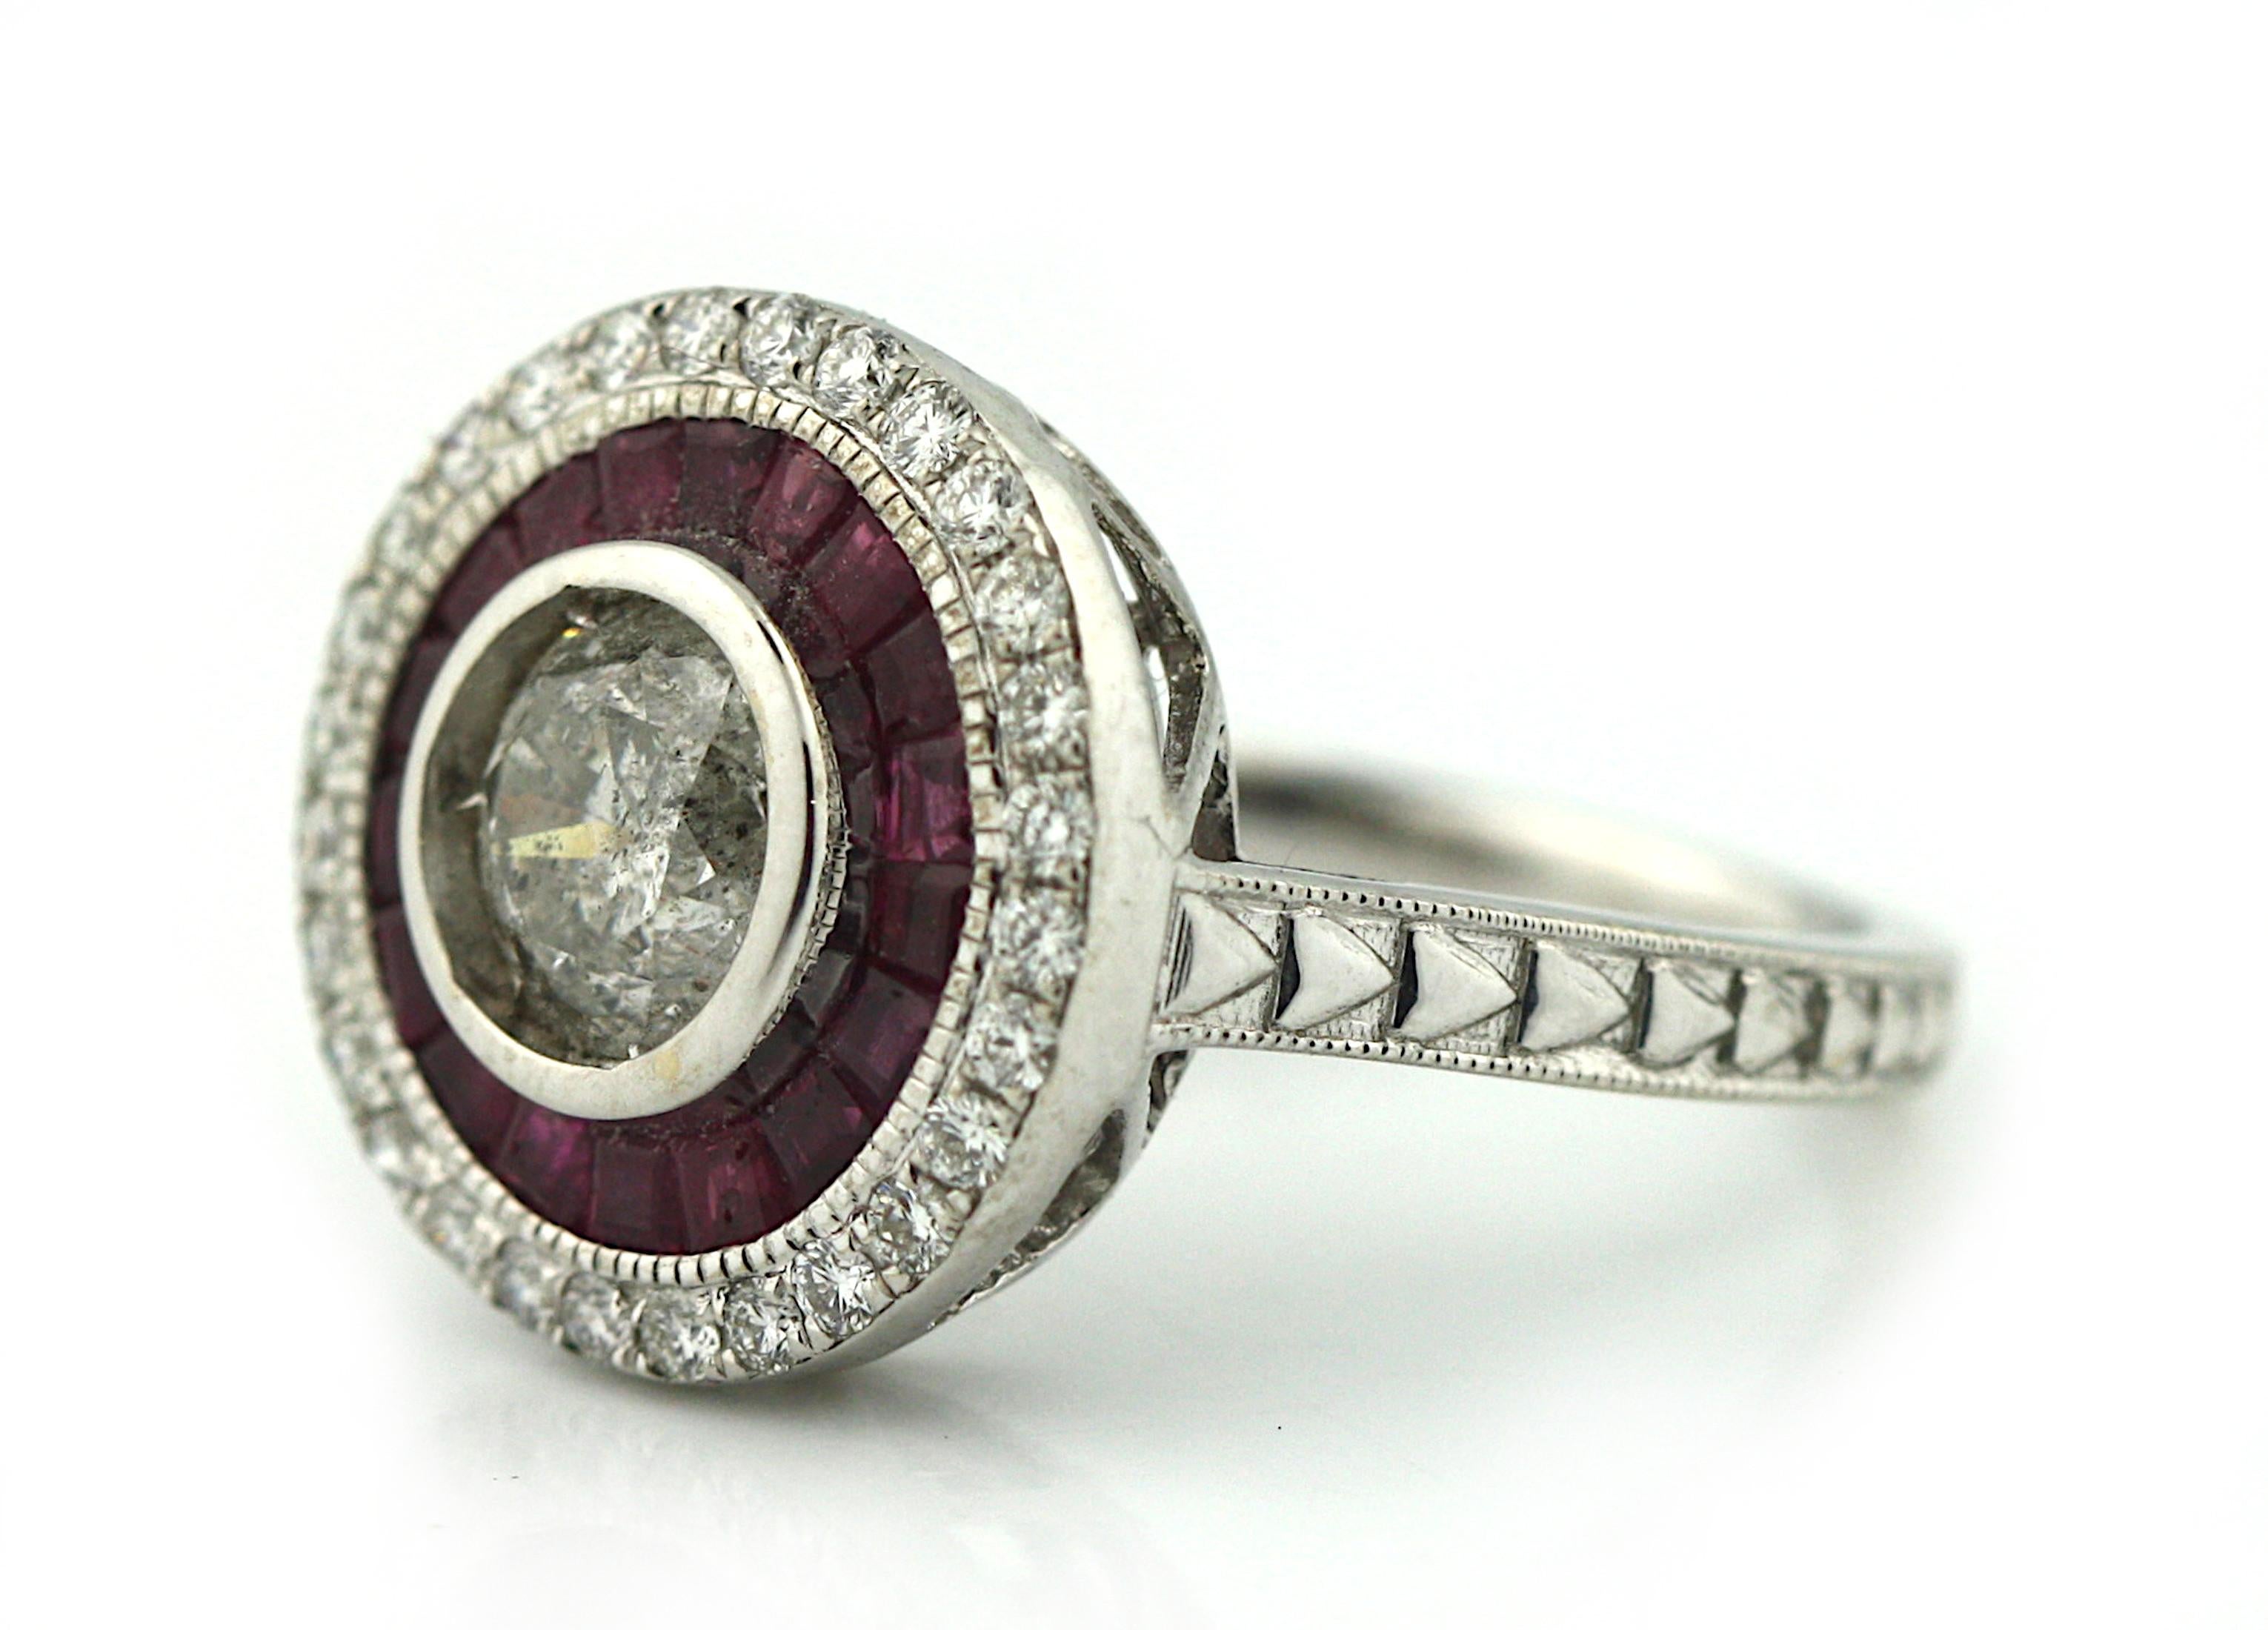 18K Diamond and Ruby Ring 
Featuring a round, brilliant-cut diamond center stone, weighing approximately 1.19 carats, within a surround of eighteen square step-cut rubies and completed with twenty-eight round brilliant-cut diamonds. 
Total weight